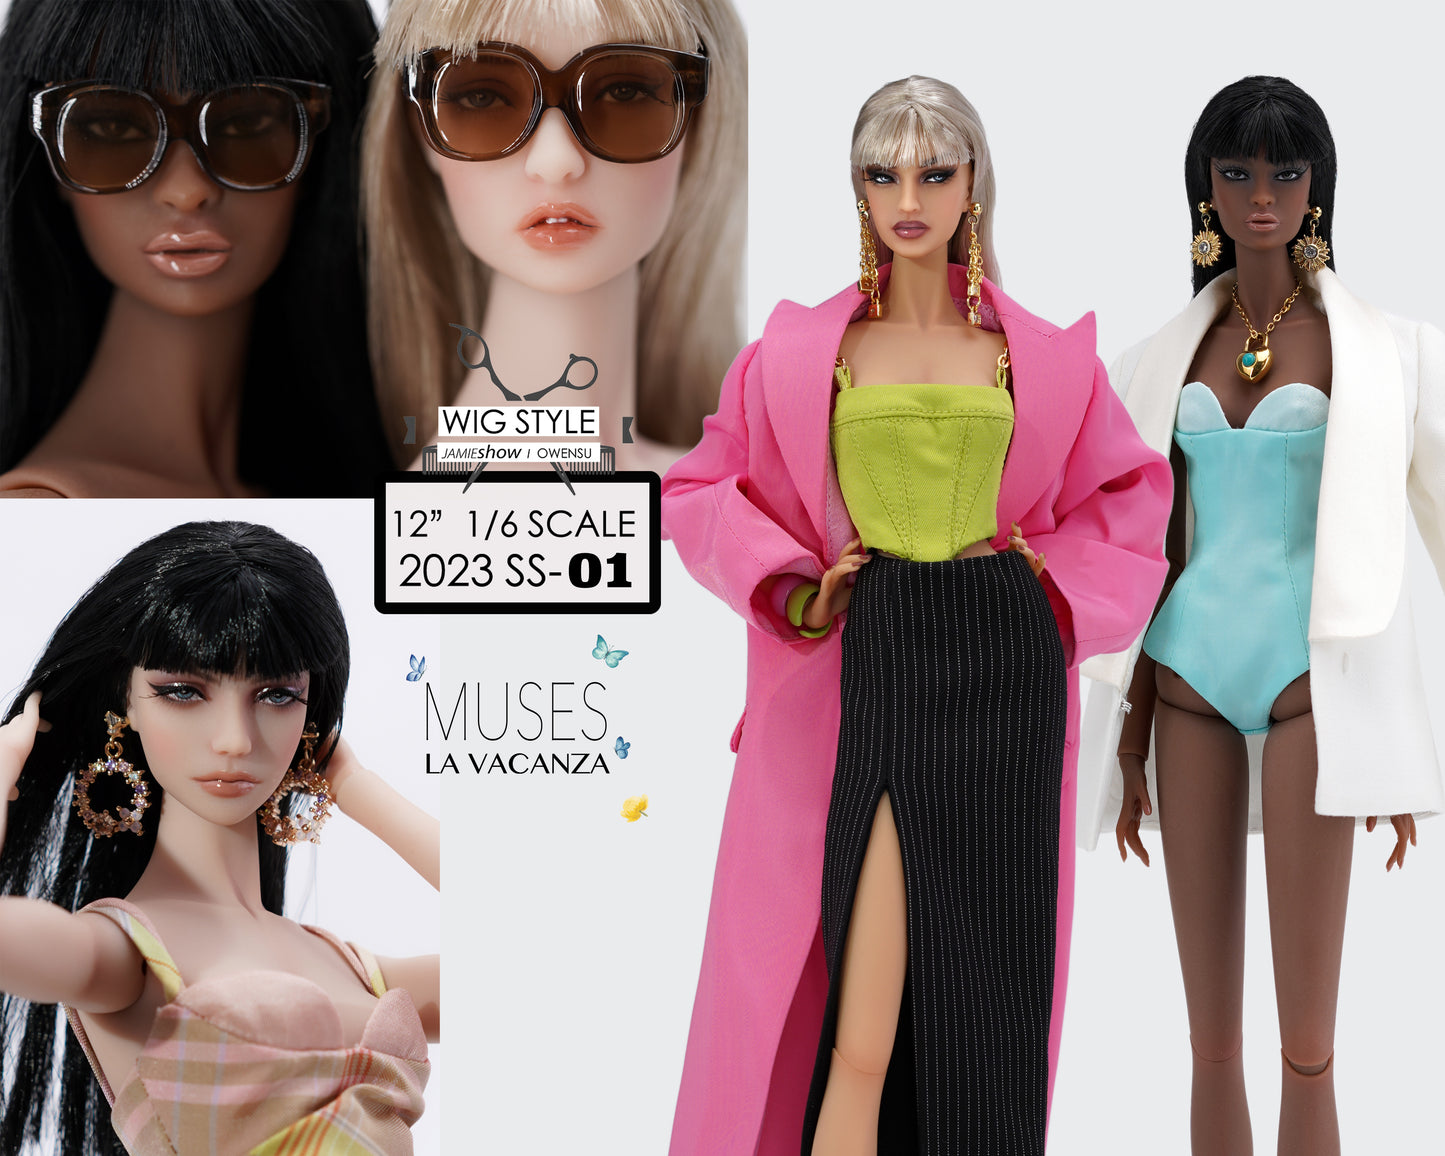 Muses La Vacanza Wig Style 1, Pre-Oder for Winter 2023 Delivery.